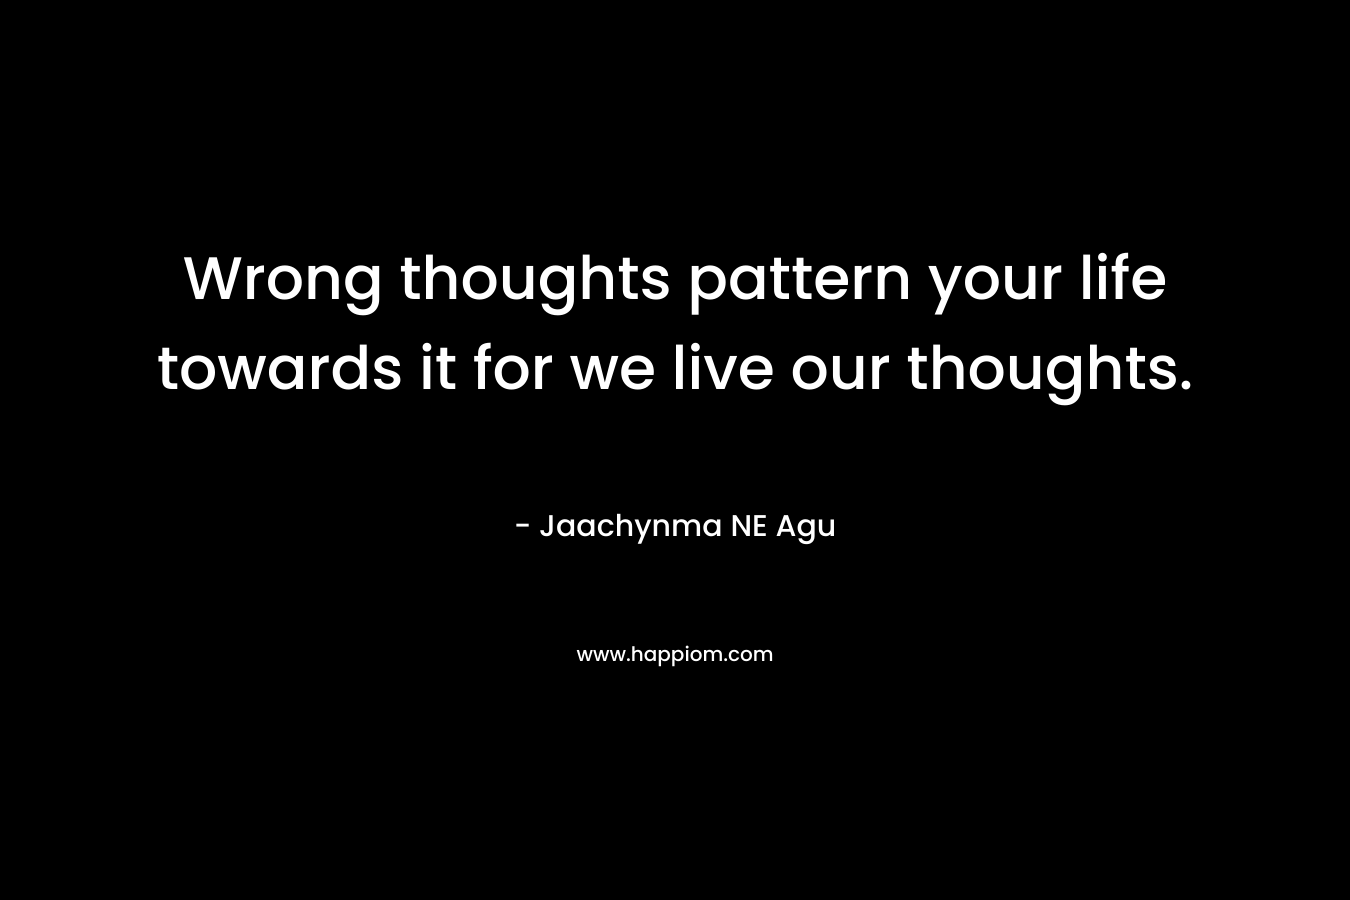 Wrong thoughts pattern your life towards it for we live our thoughts.